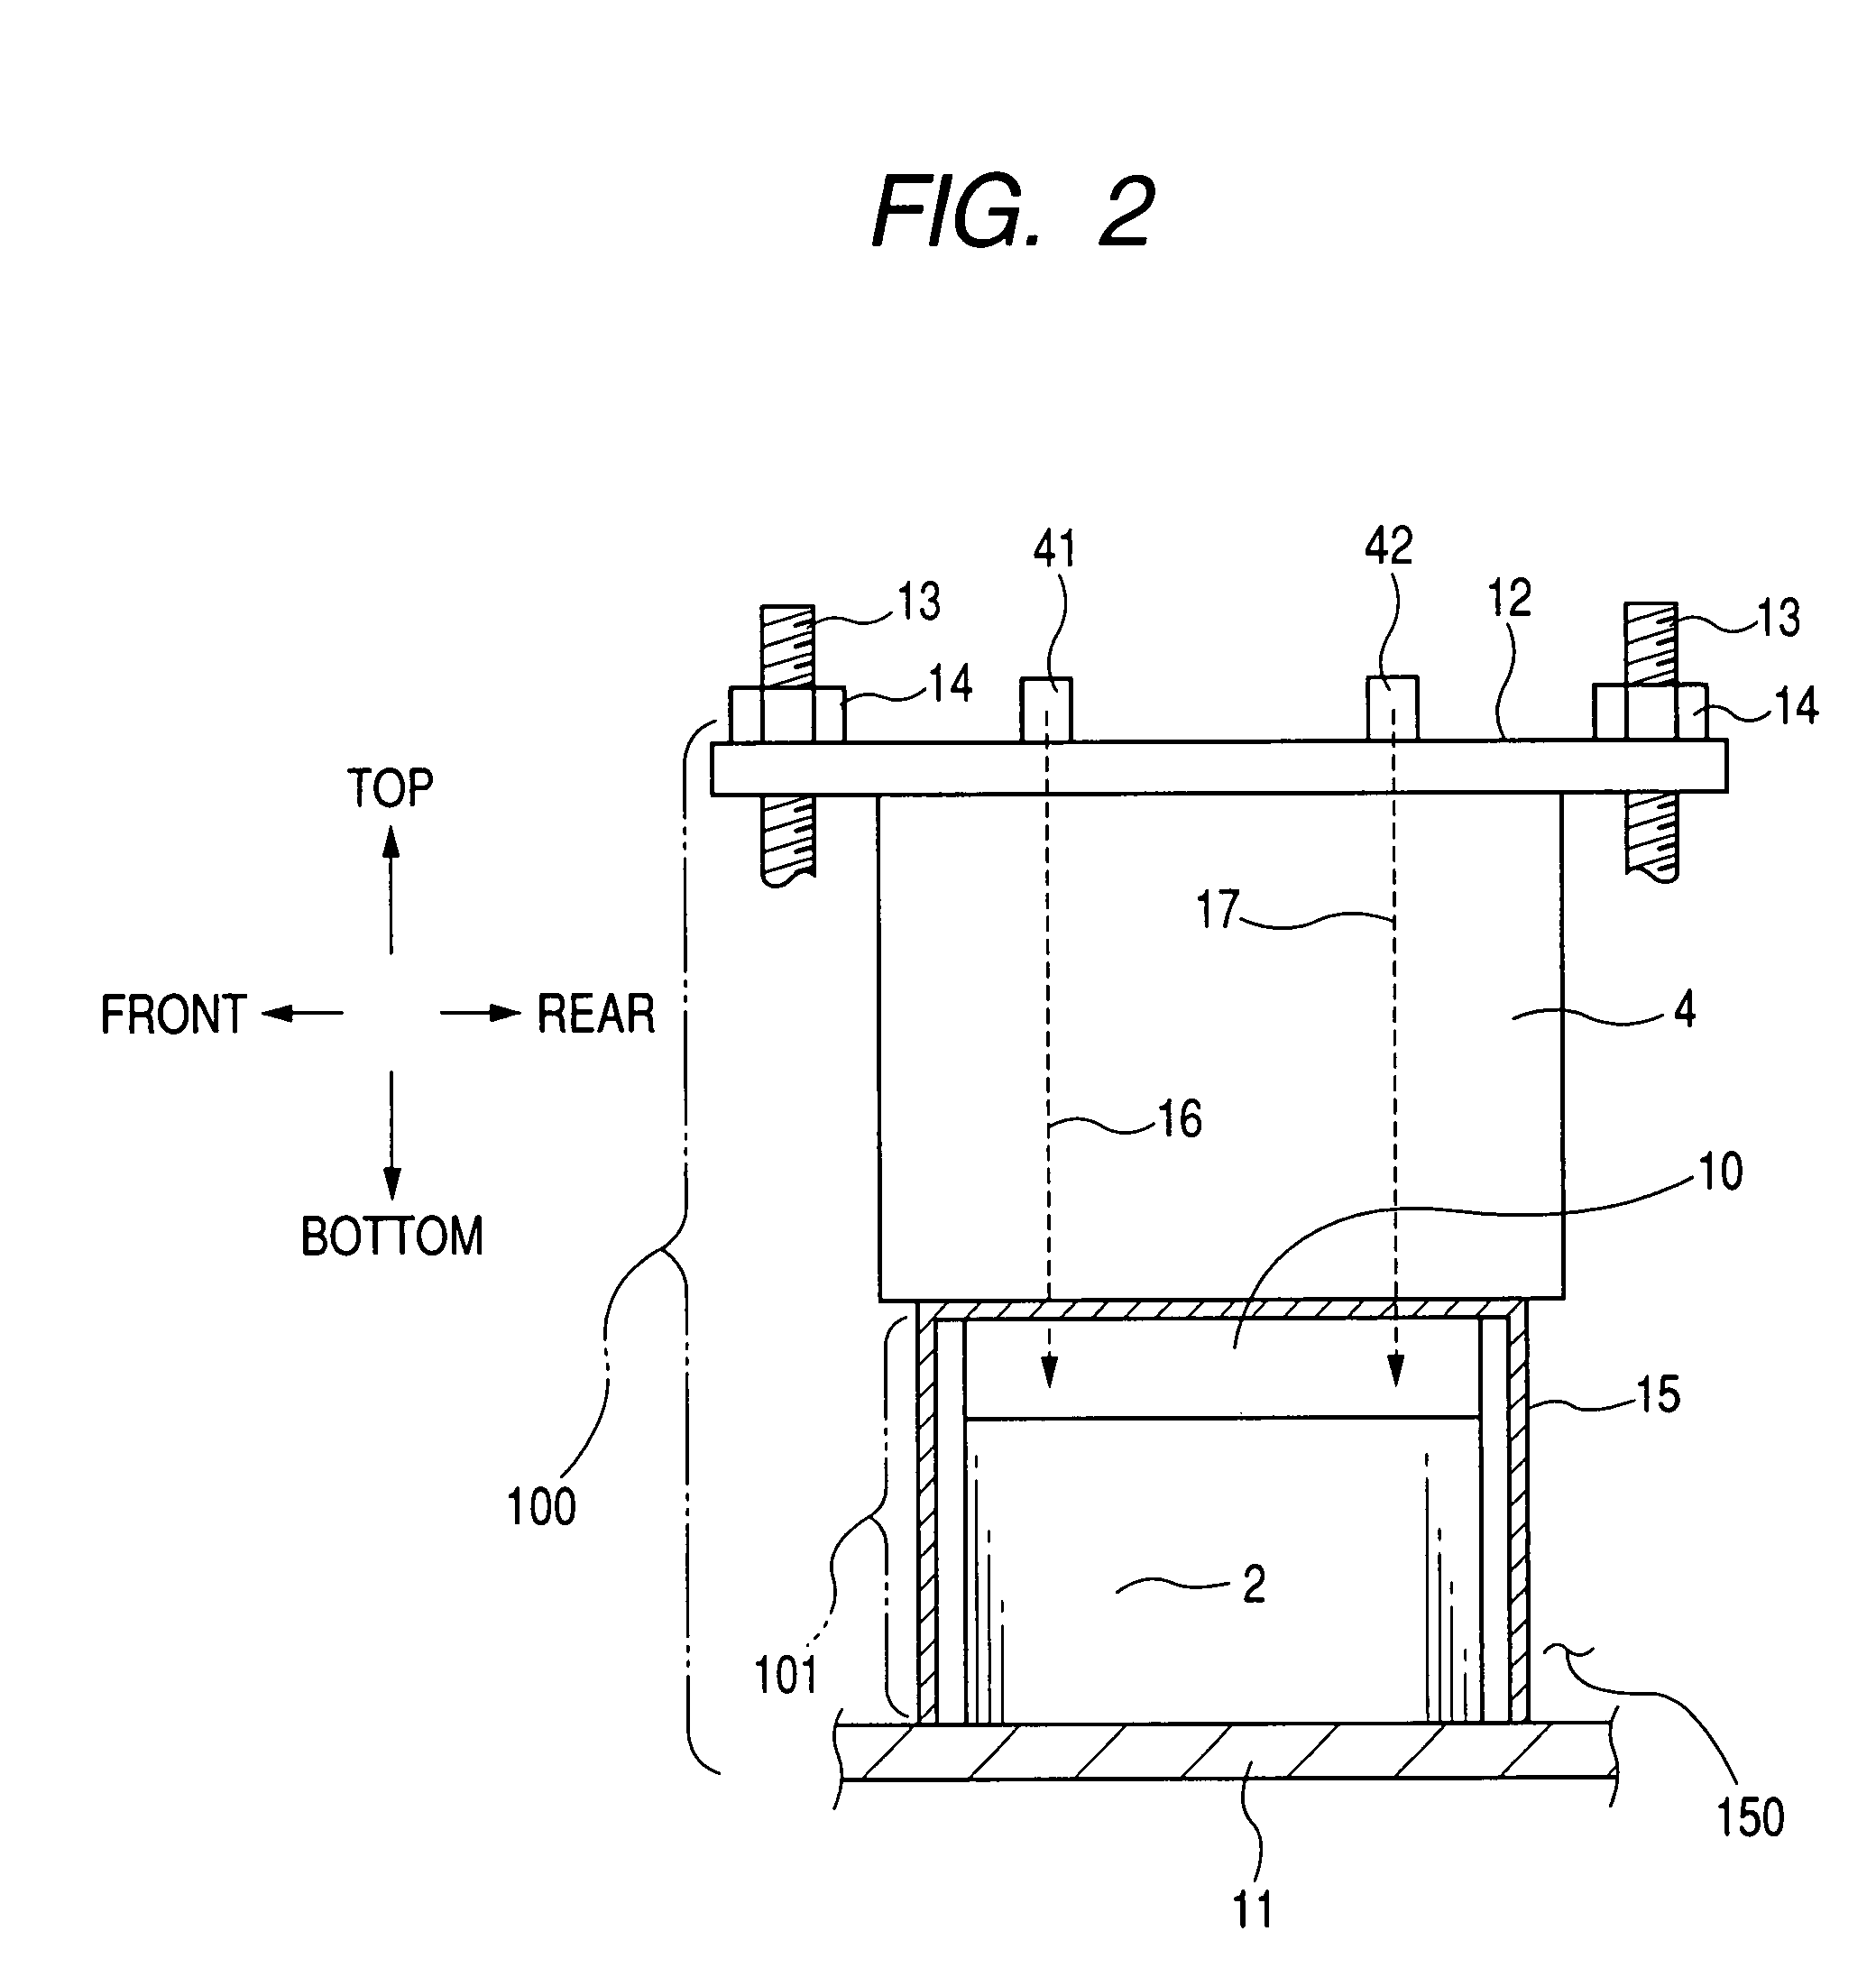 Multiple power supply apparatus with improved installability